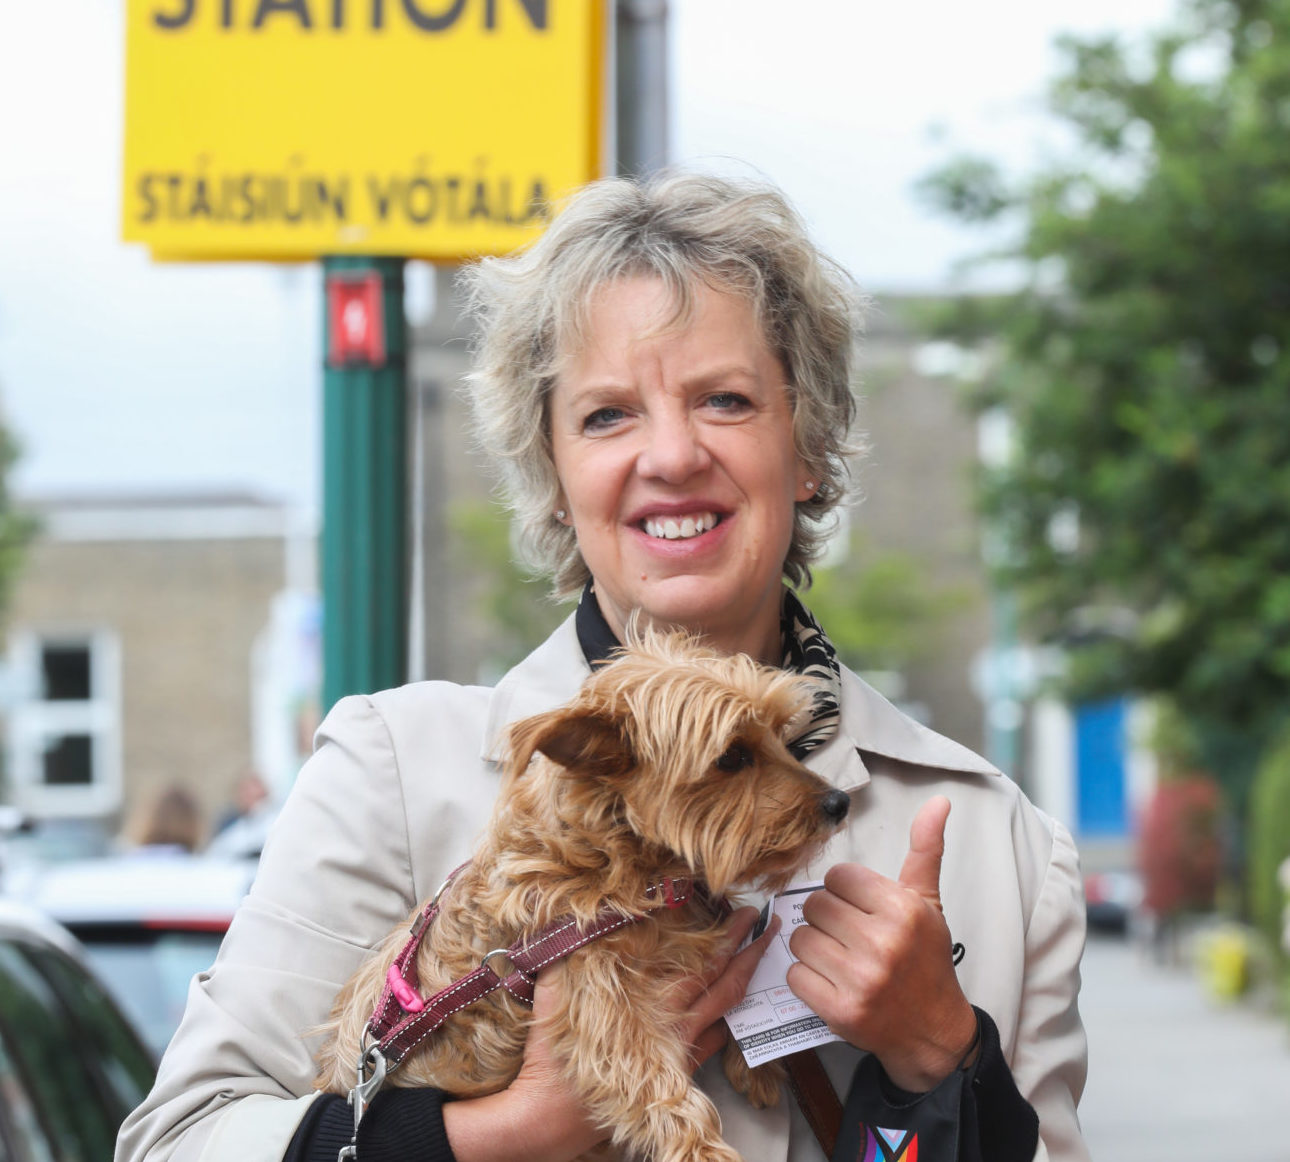 Labour Senator Ivana Bacik arriving at her polling station in Portobello, Dublin to cast her vote with her dog Ginny.